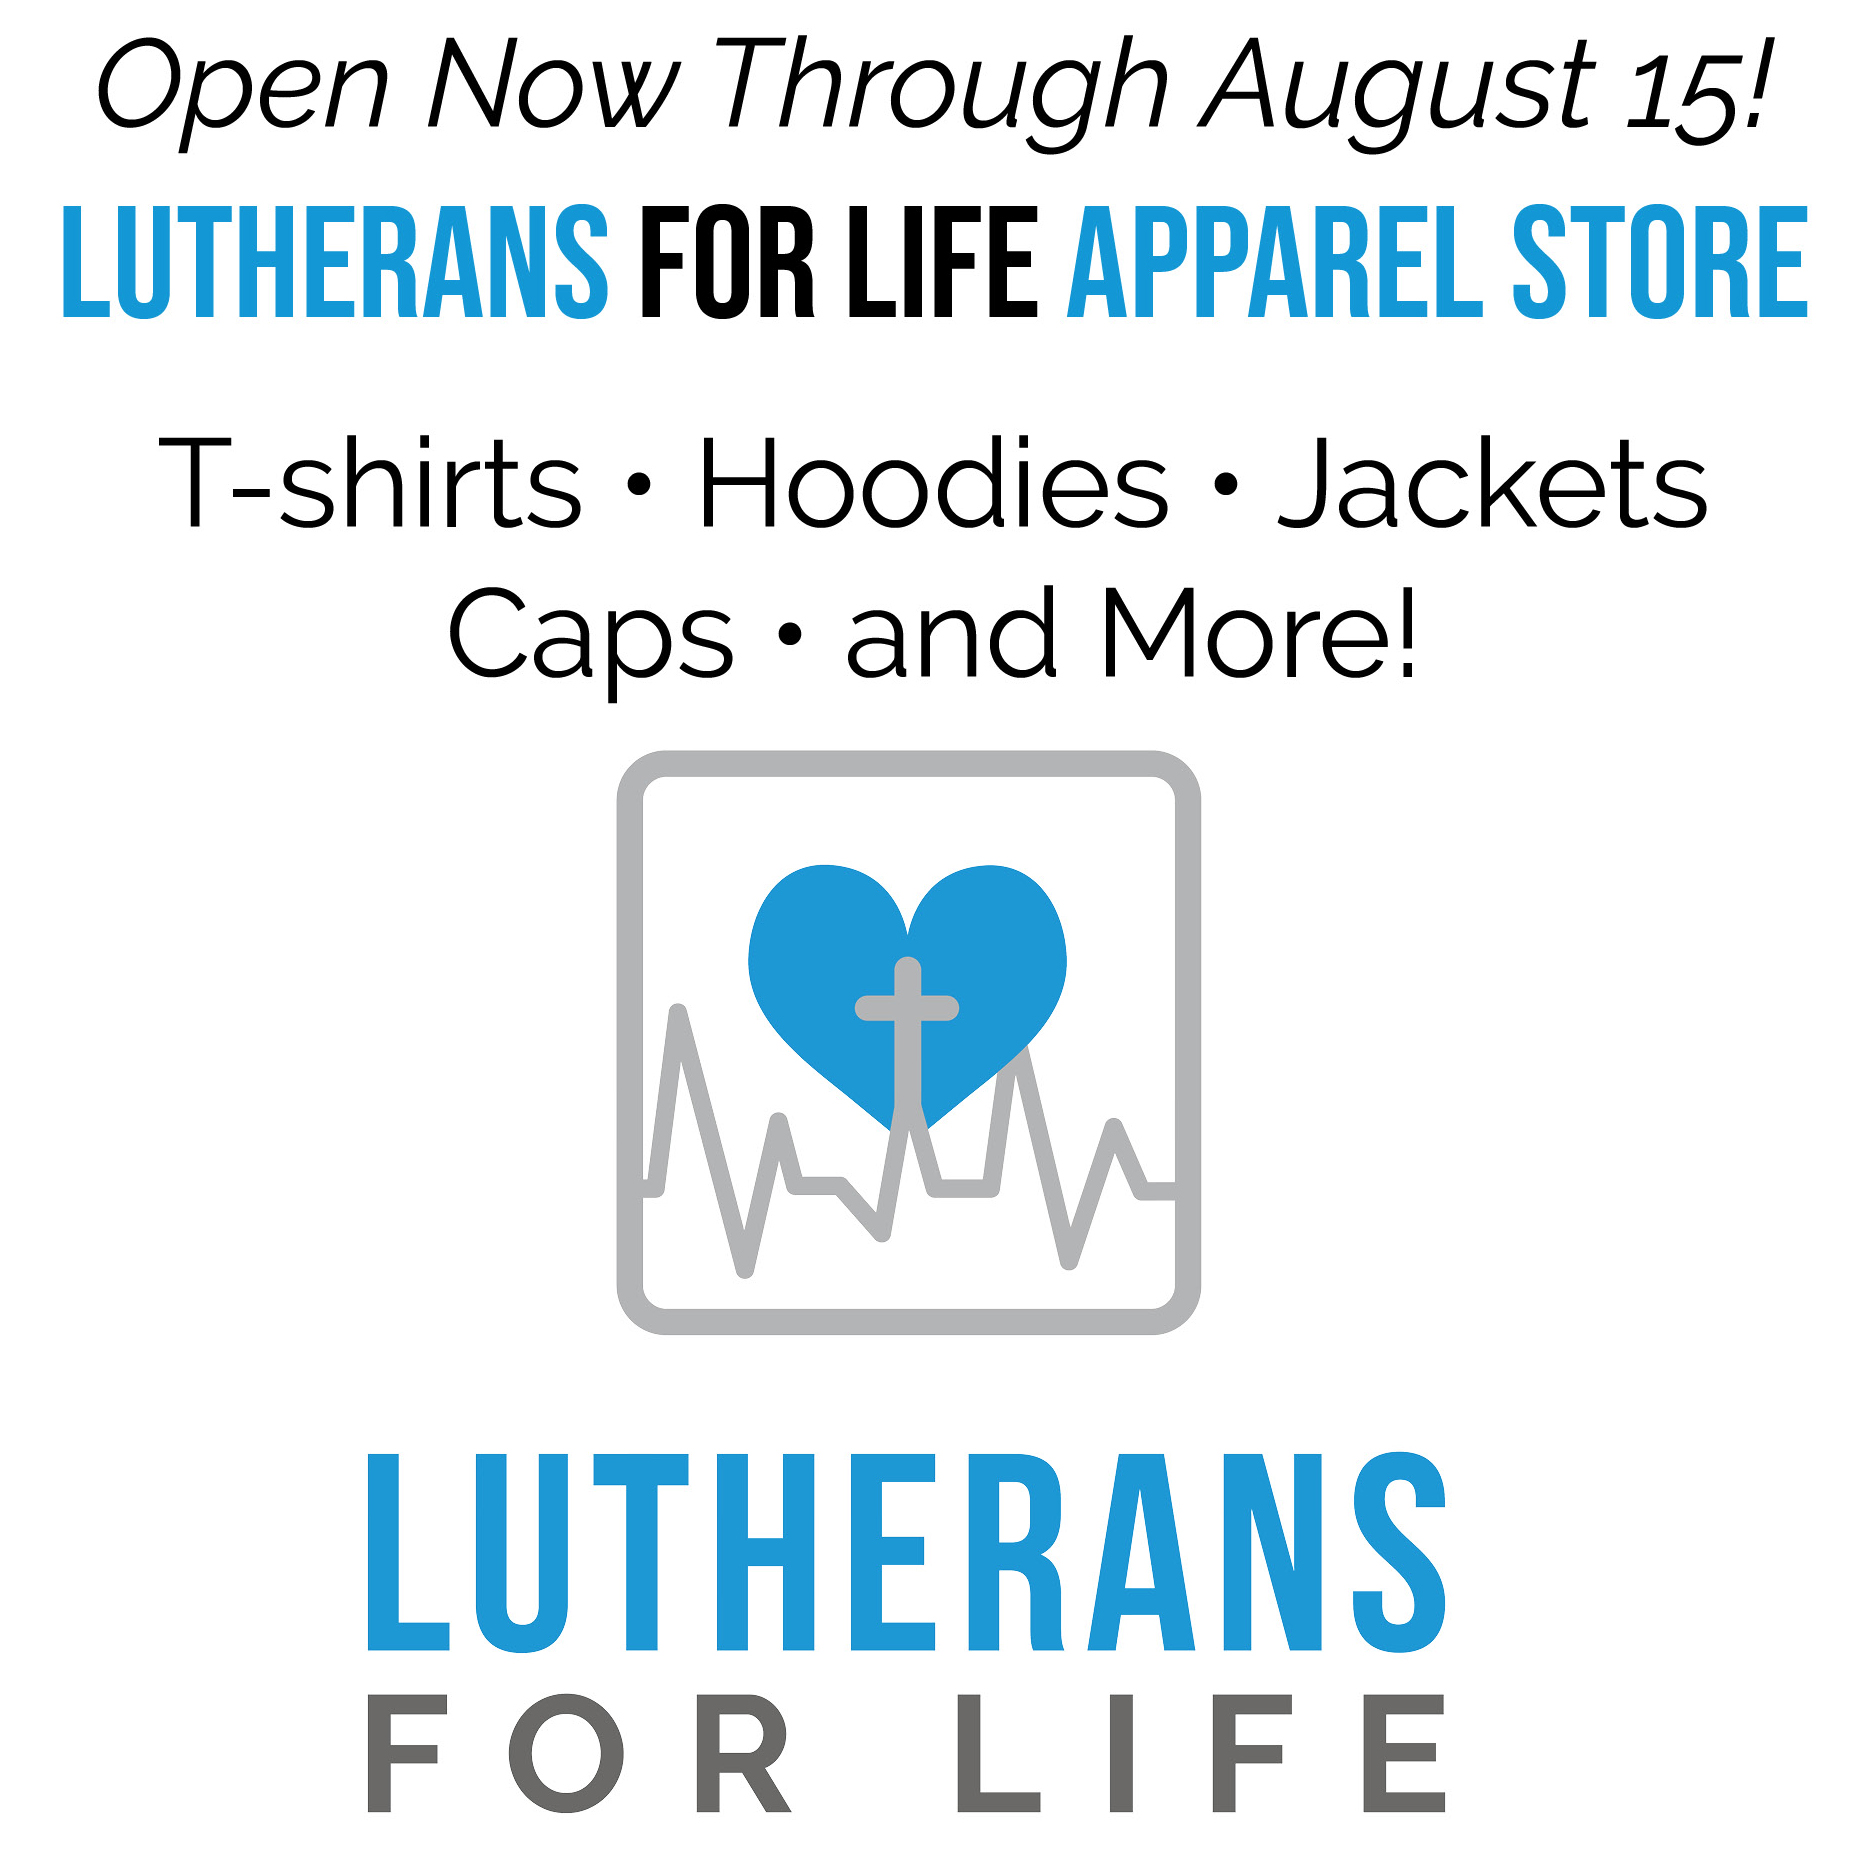 Lutherans For Life Apparel Store